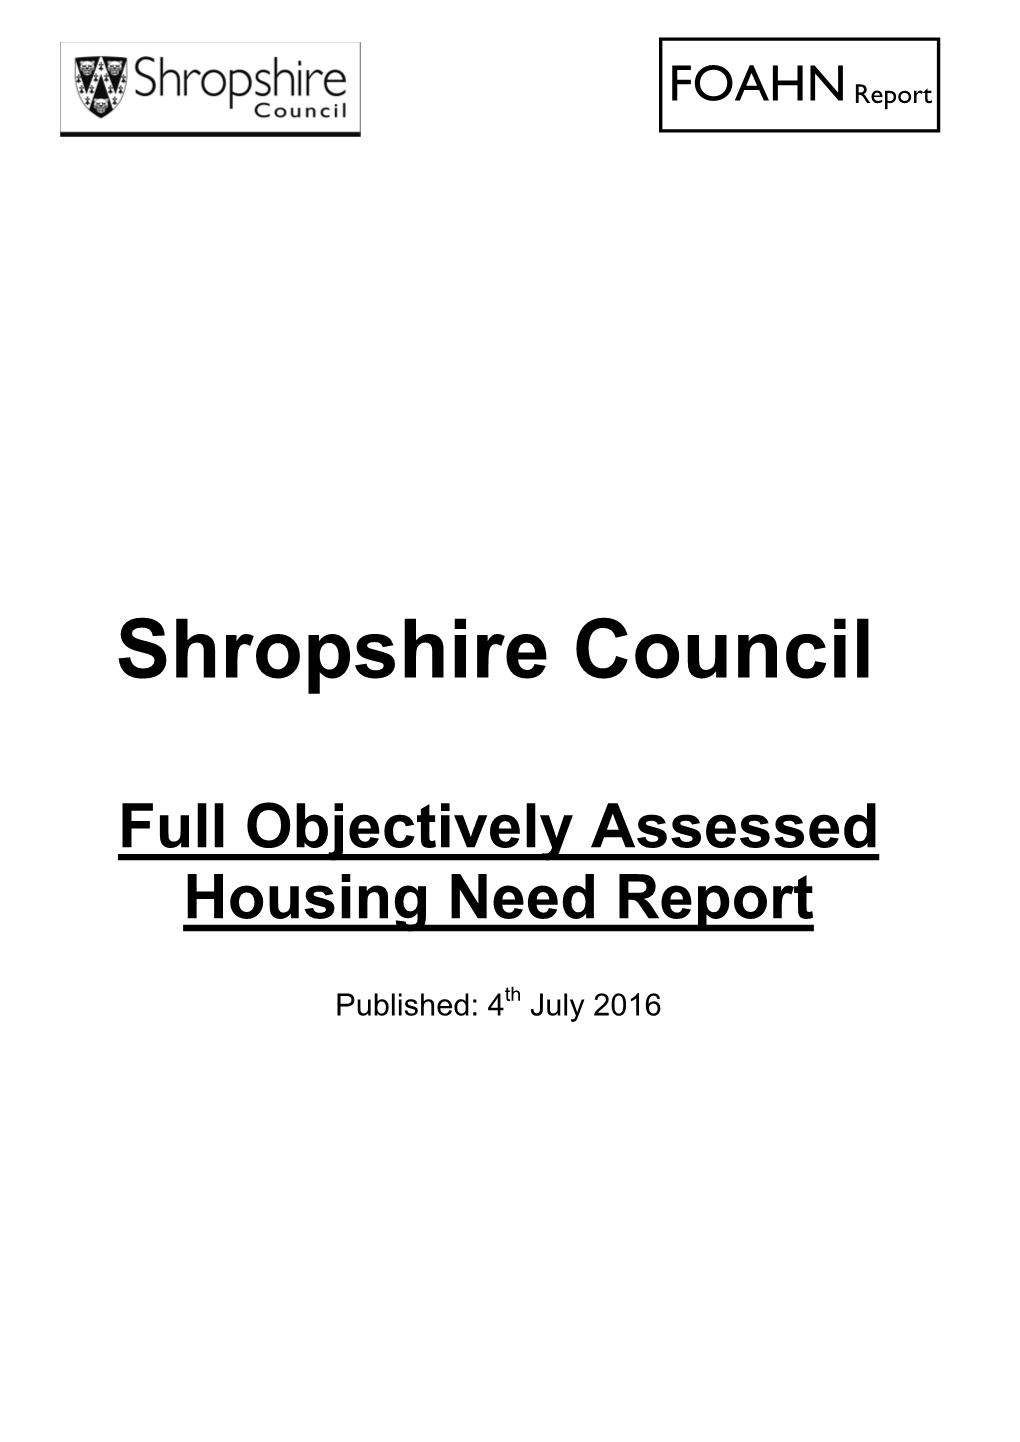 Full Objectively Assessed Housing Need Report